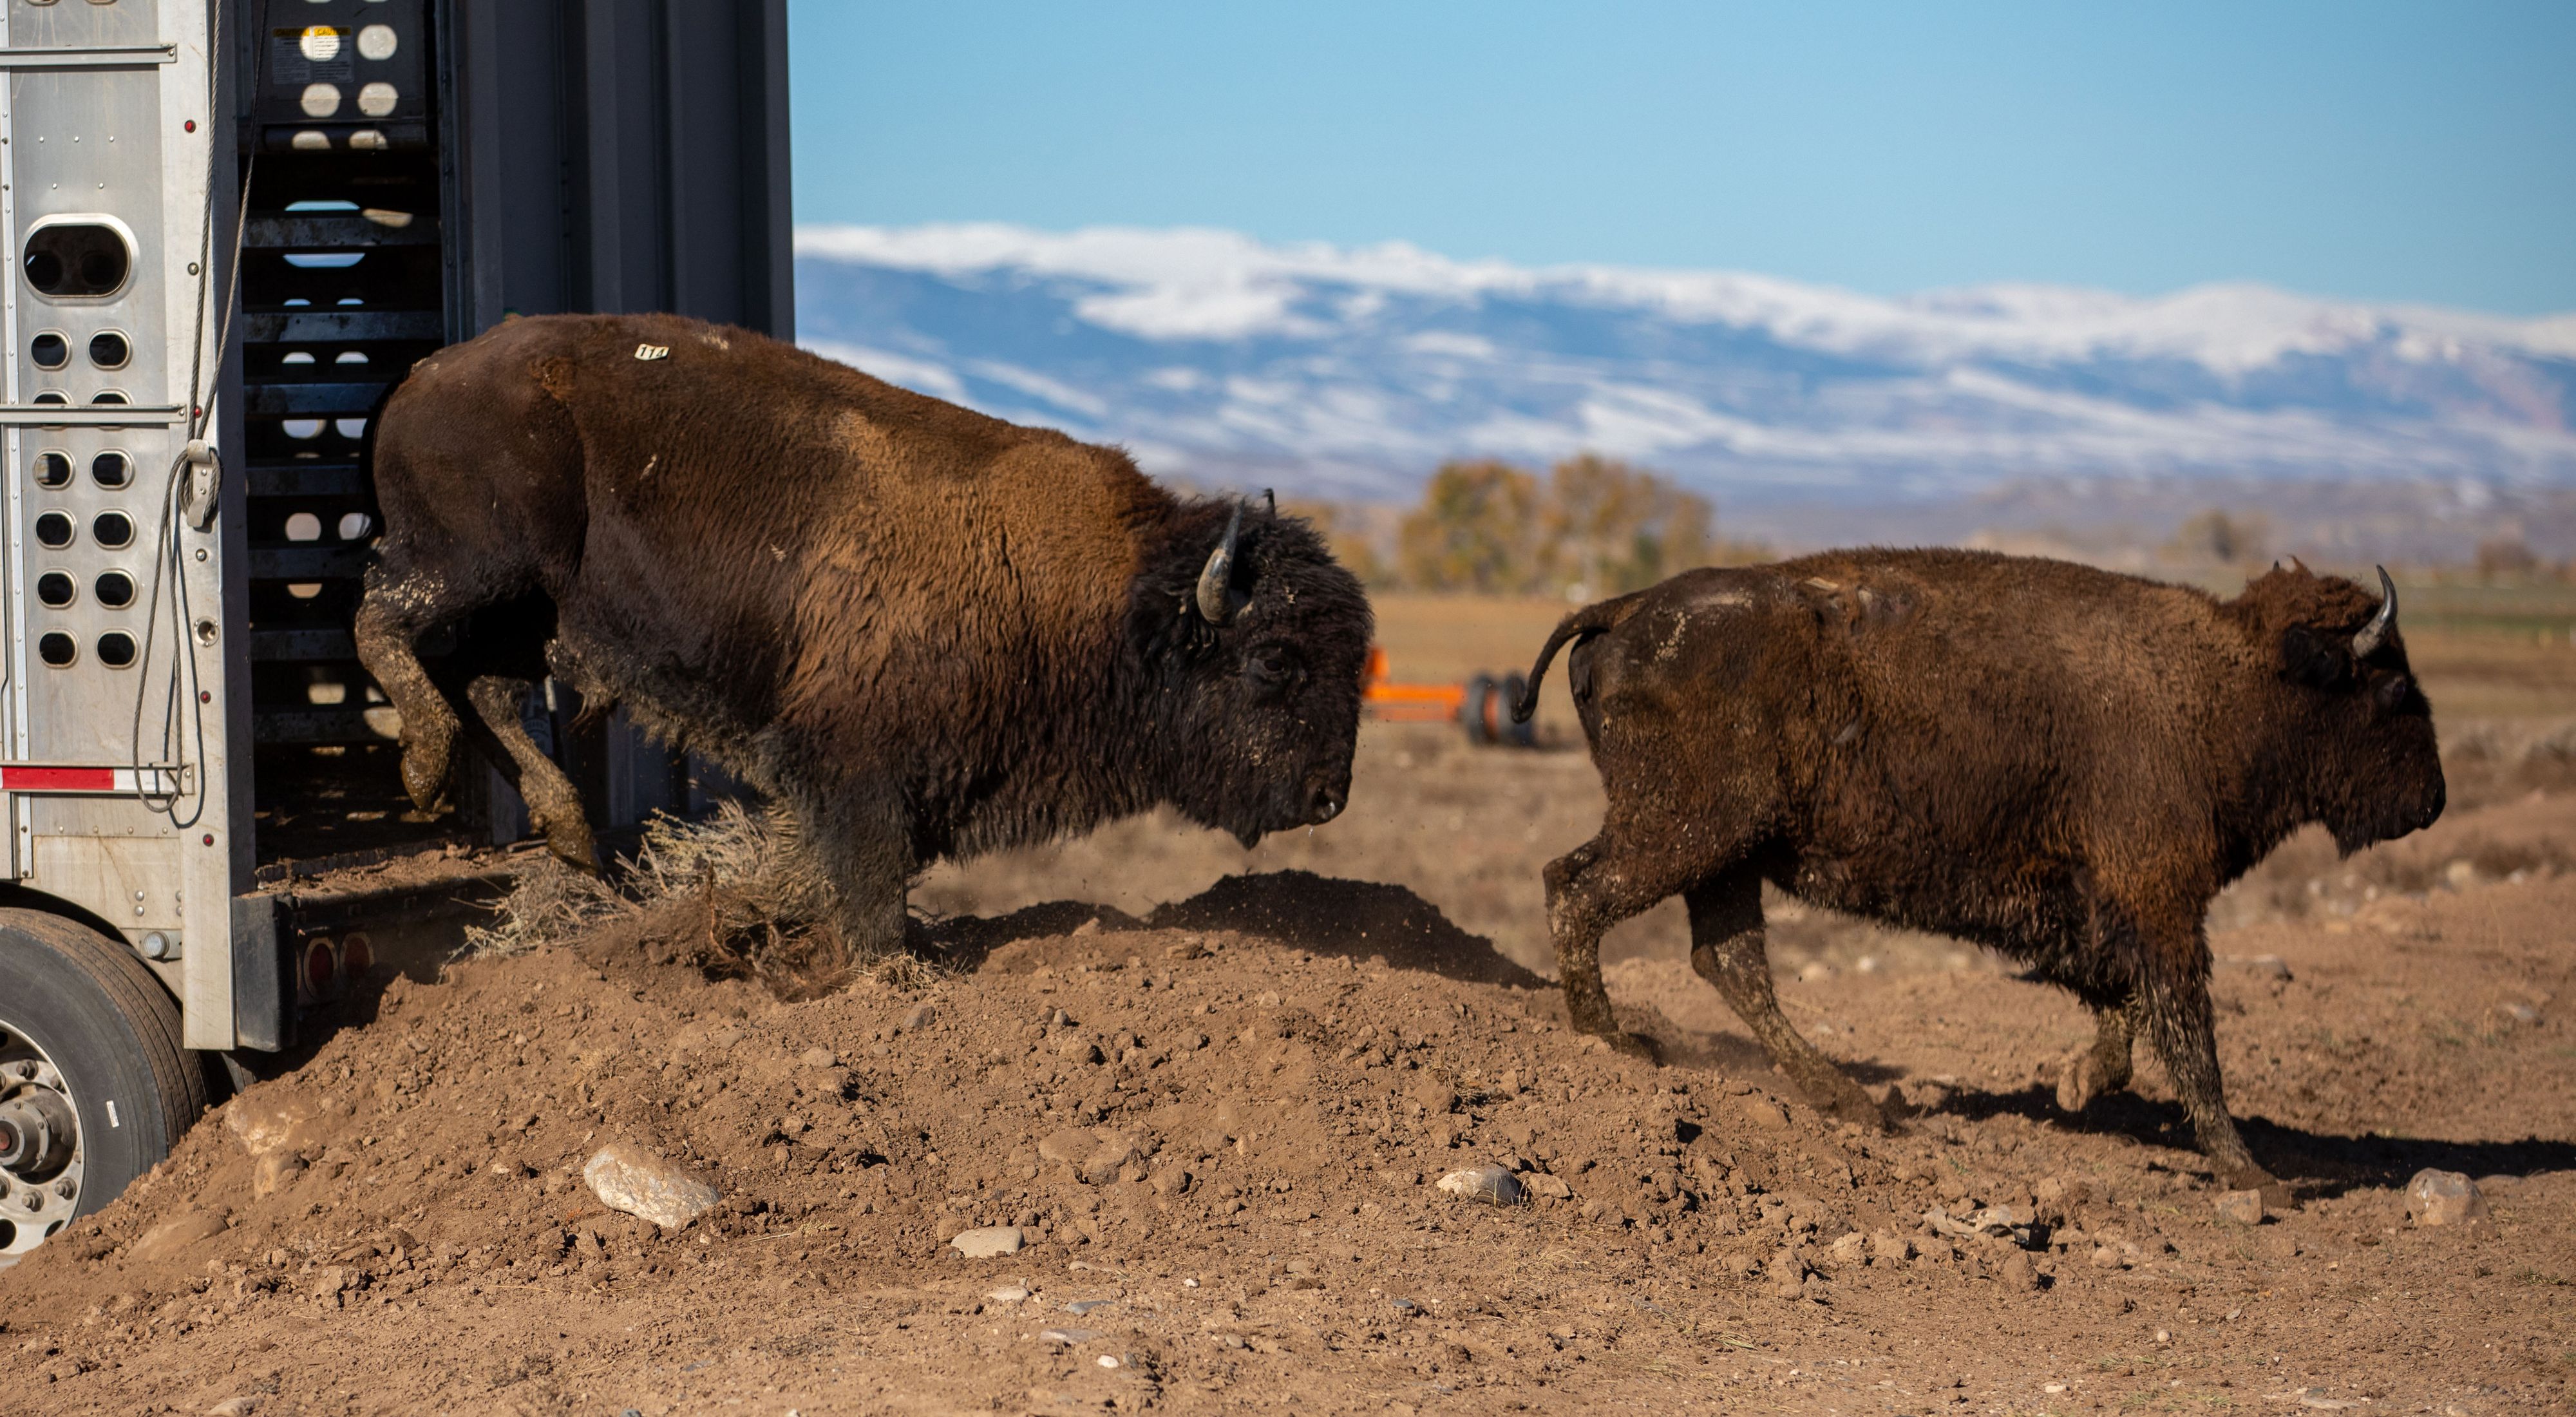 Two buffalo emerging from a trailer during a transfer.